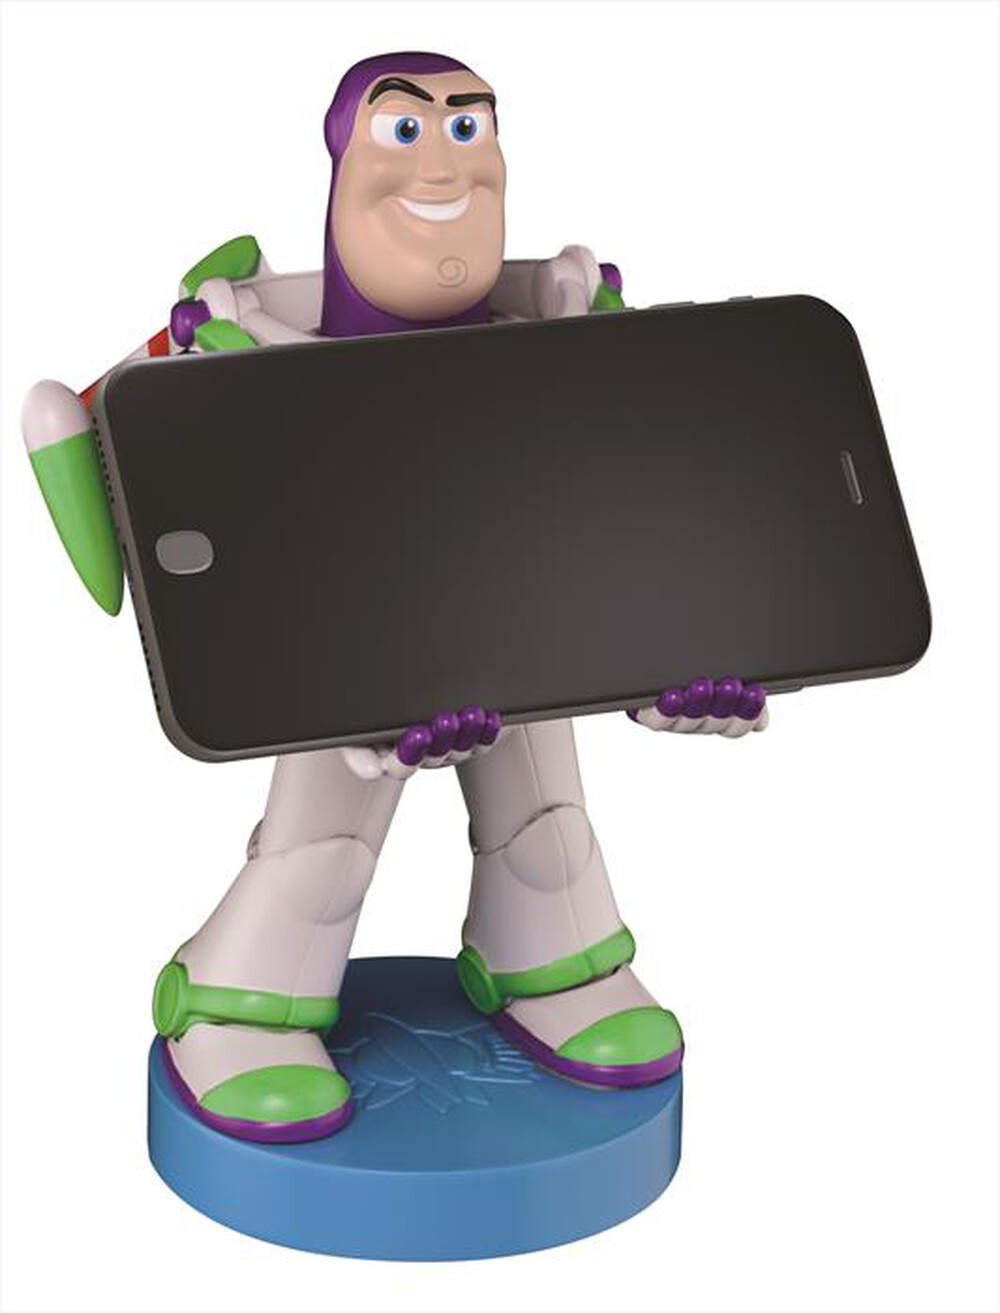 "EXQUISITE GAMING - BUZZ LIGHTYEAR CABLE GUY"